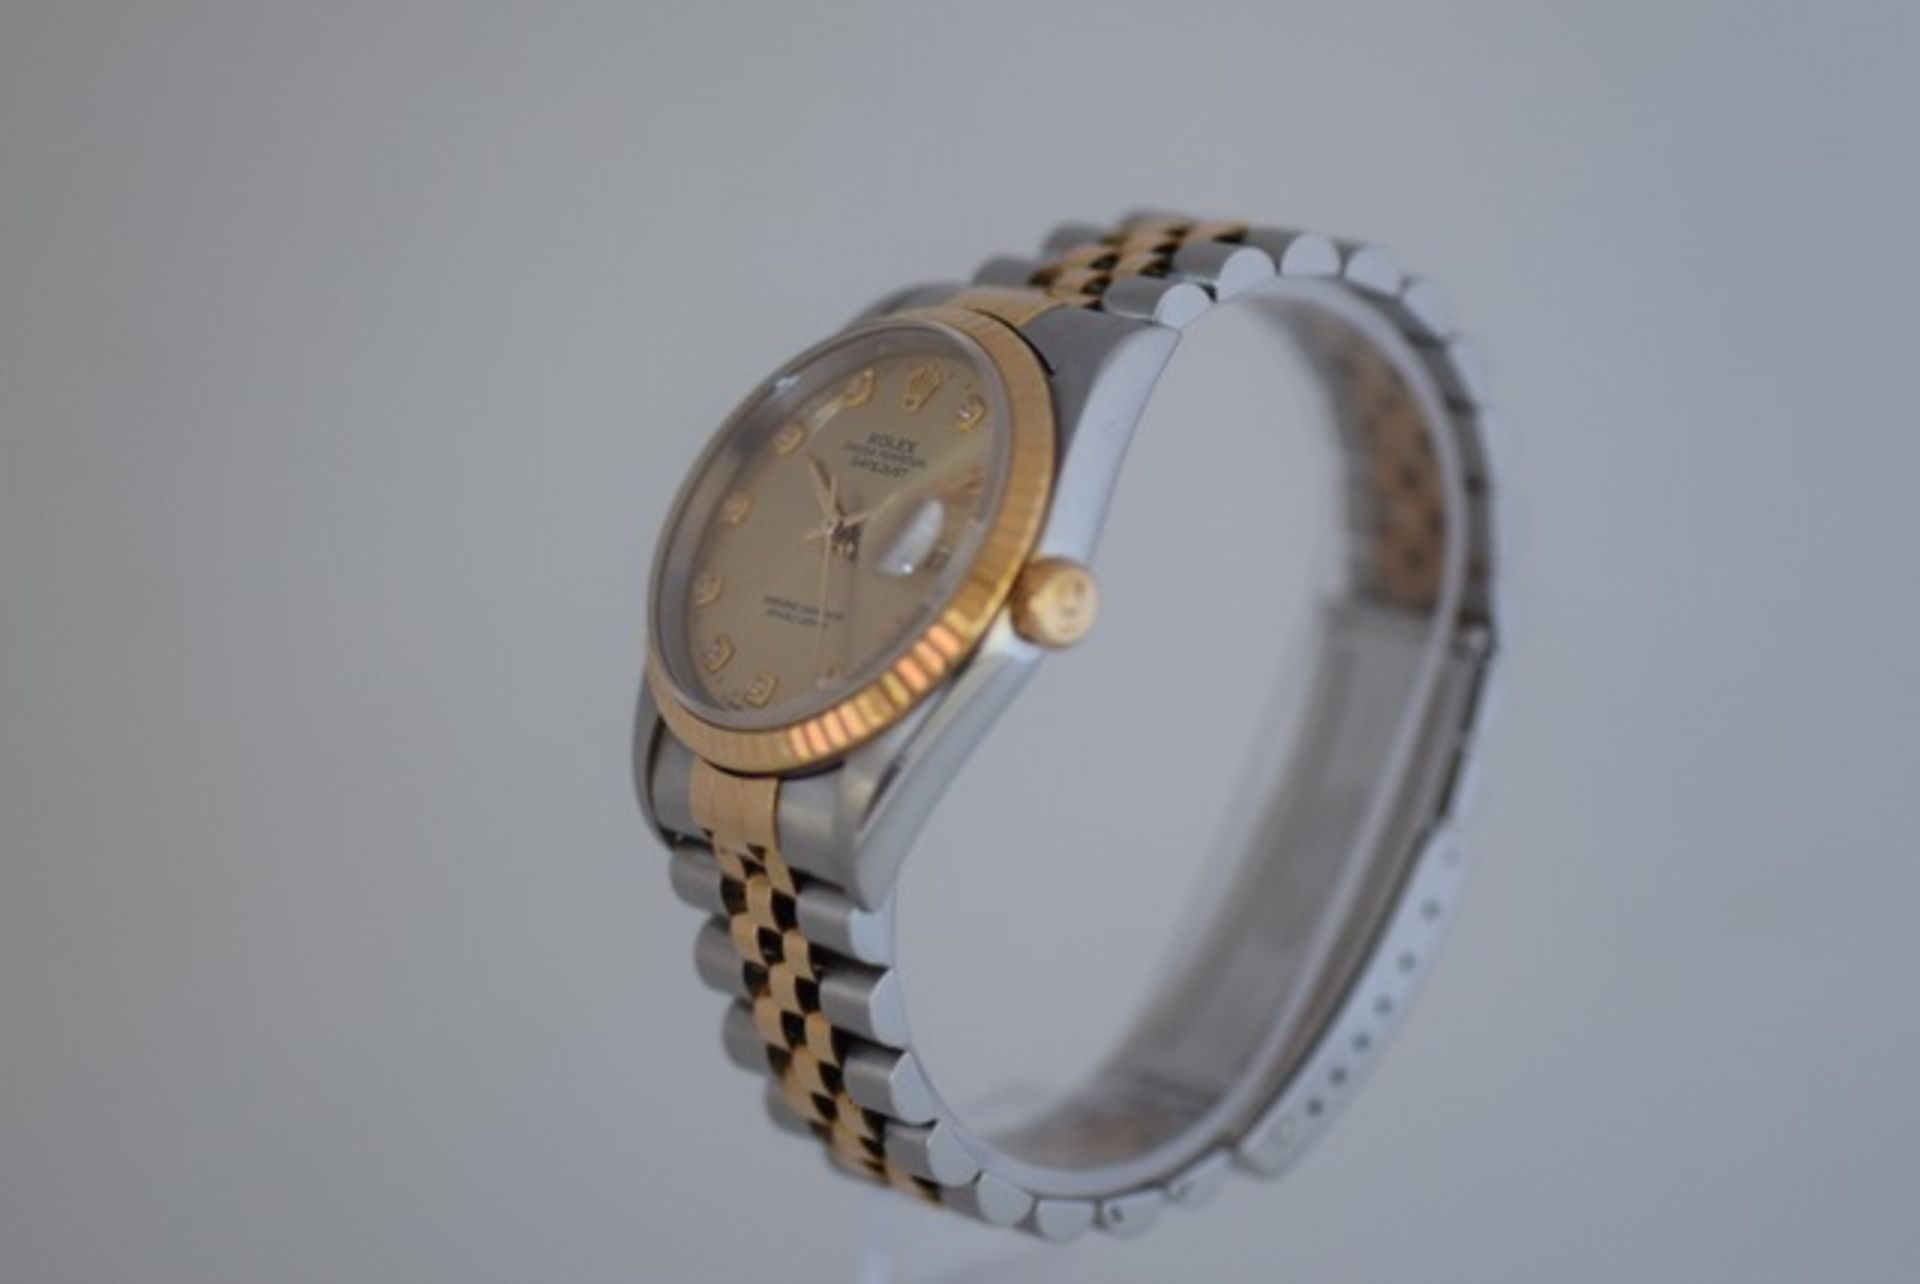 ROLEX DATEJUST 16233 with papers - Image 4 of 5